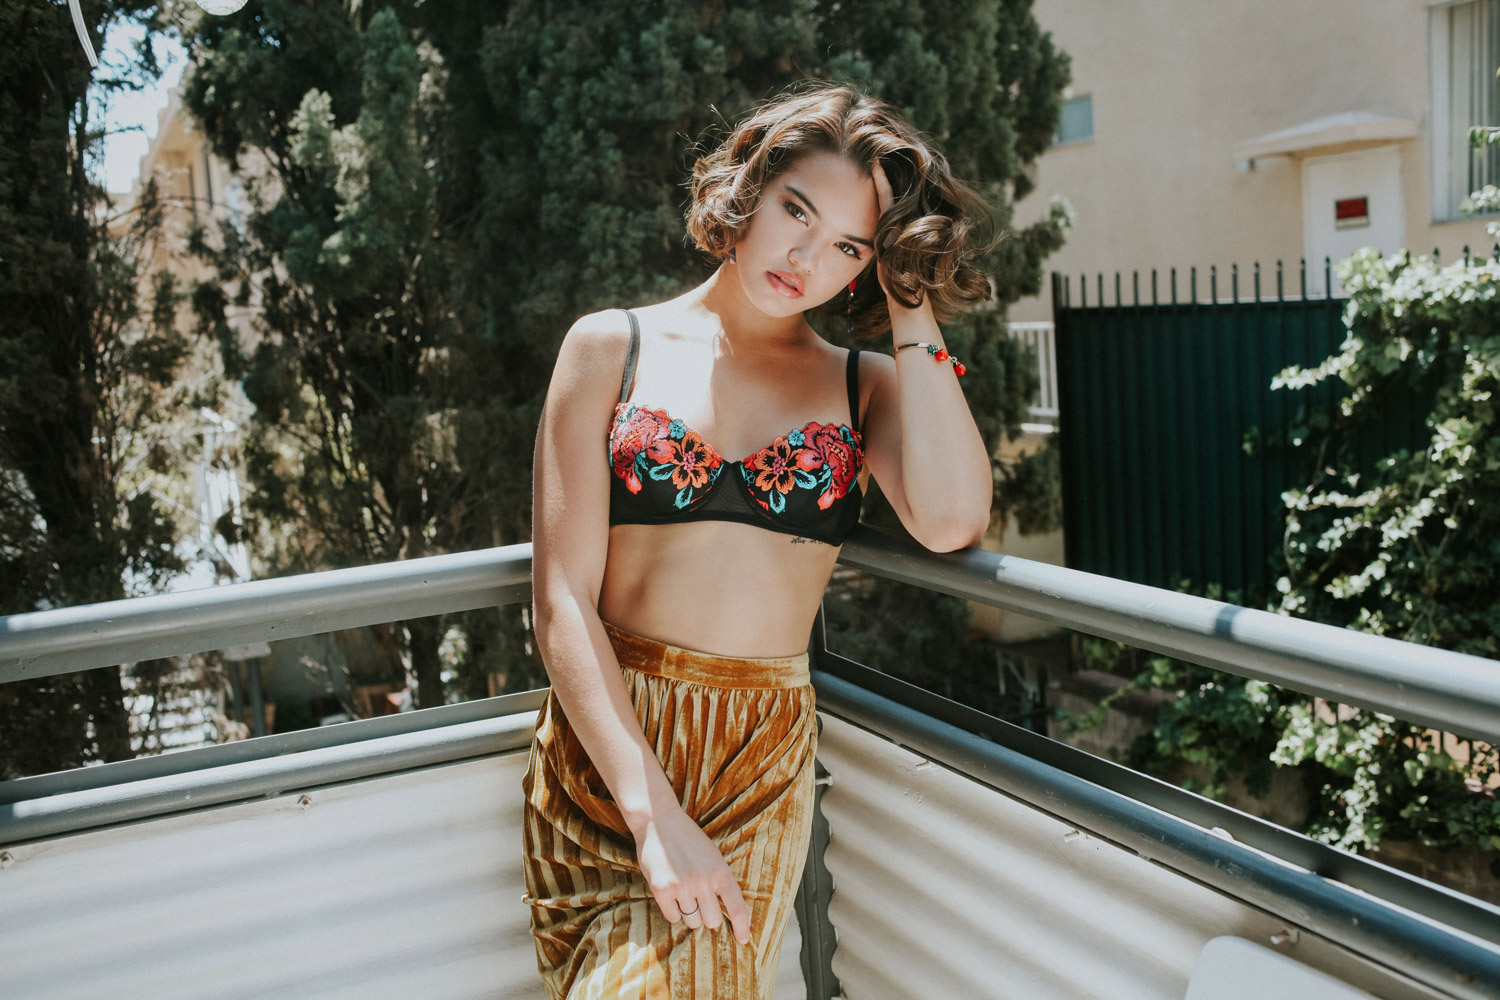 Paris Berelc opens about real friends, being happy and her passion for acti...